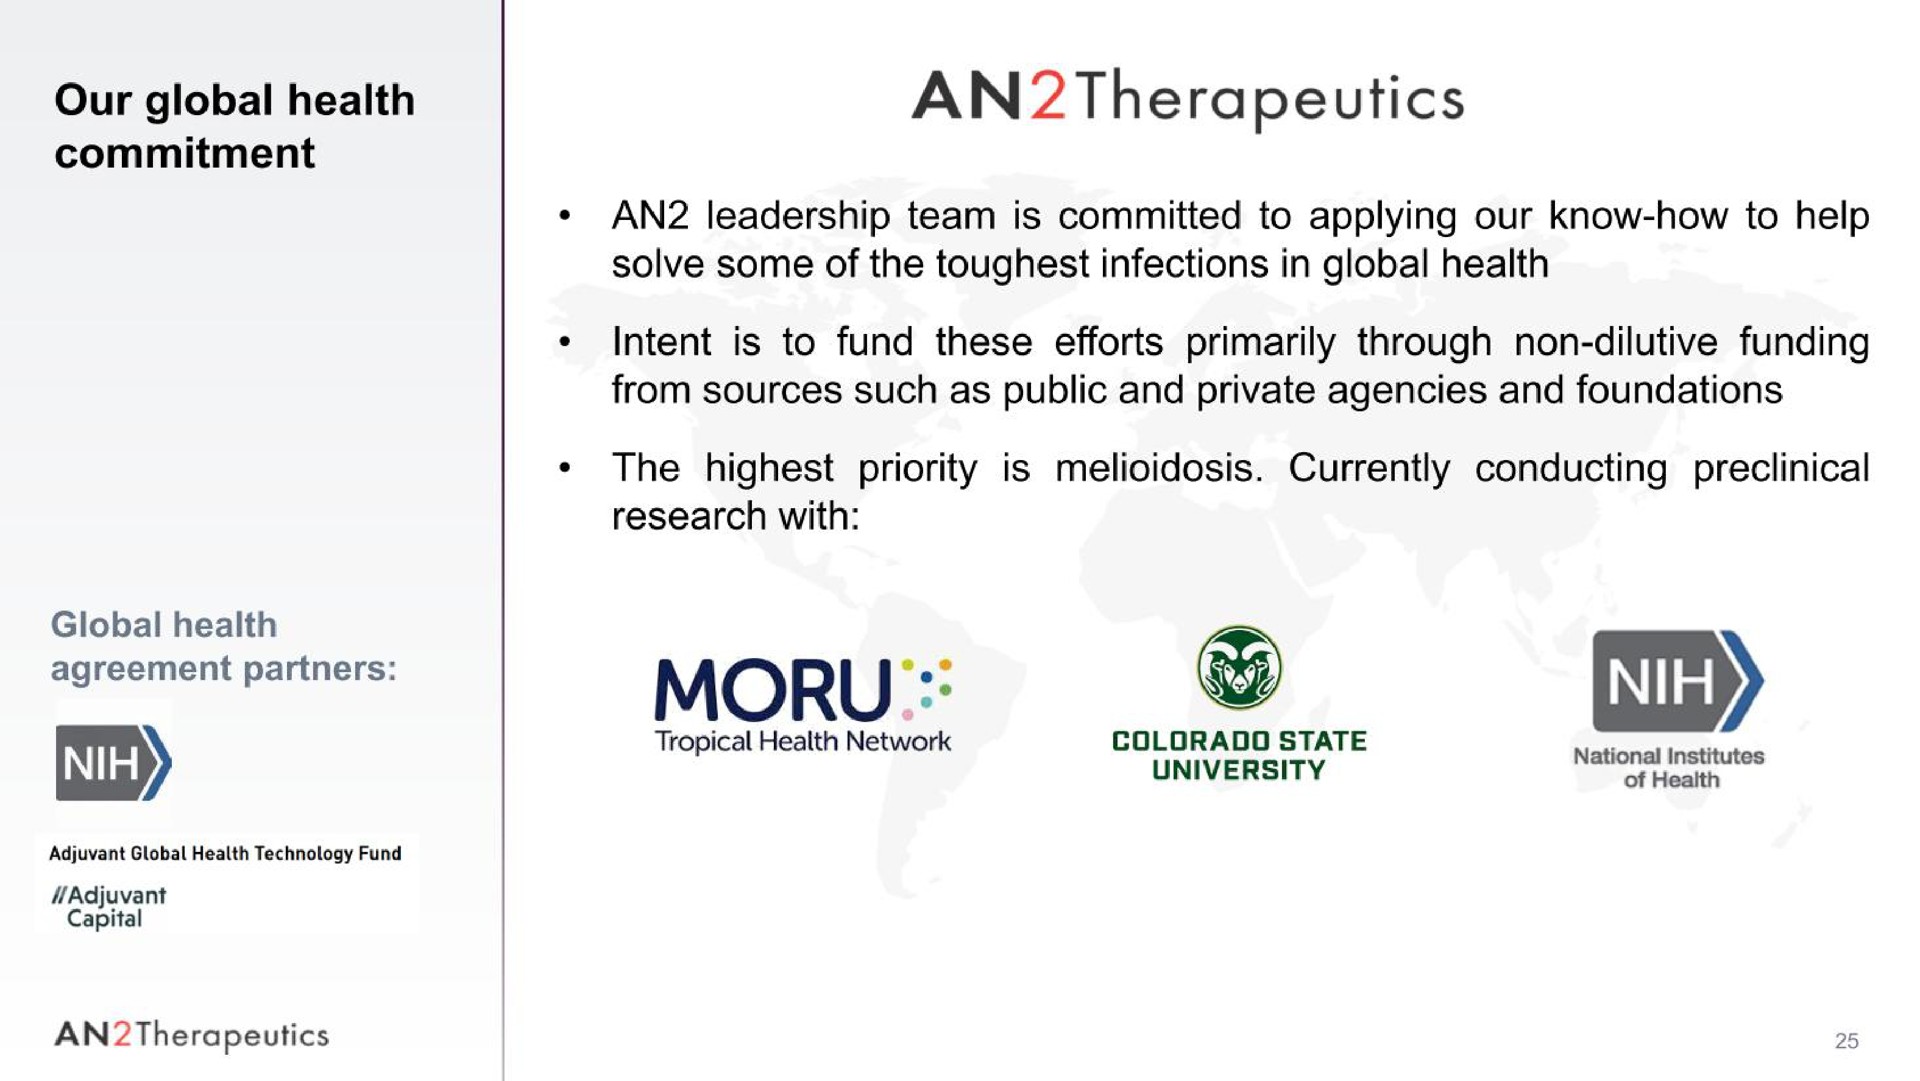 our global health commitment an therapeutics an leadership team is committed to applying our know how to help solve some of the infections in global health intent is from sources such as public and private agencies and foundations to fund these efforts primarily through non dilutive funding the highest priority research with is currently conducting preclinical university global health an therapeutics i | AN2 Therapeutics